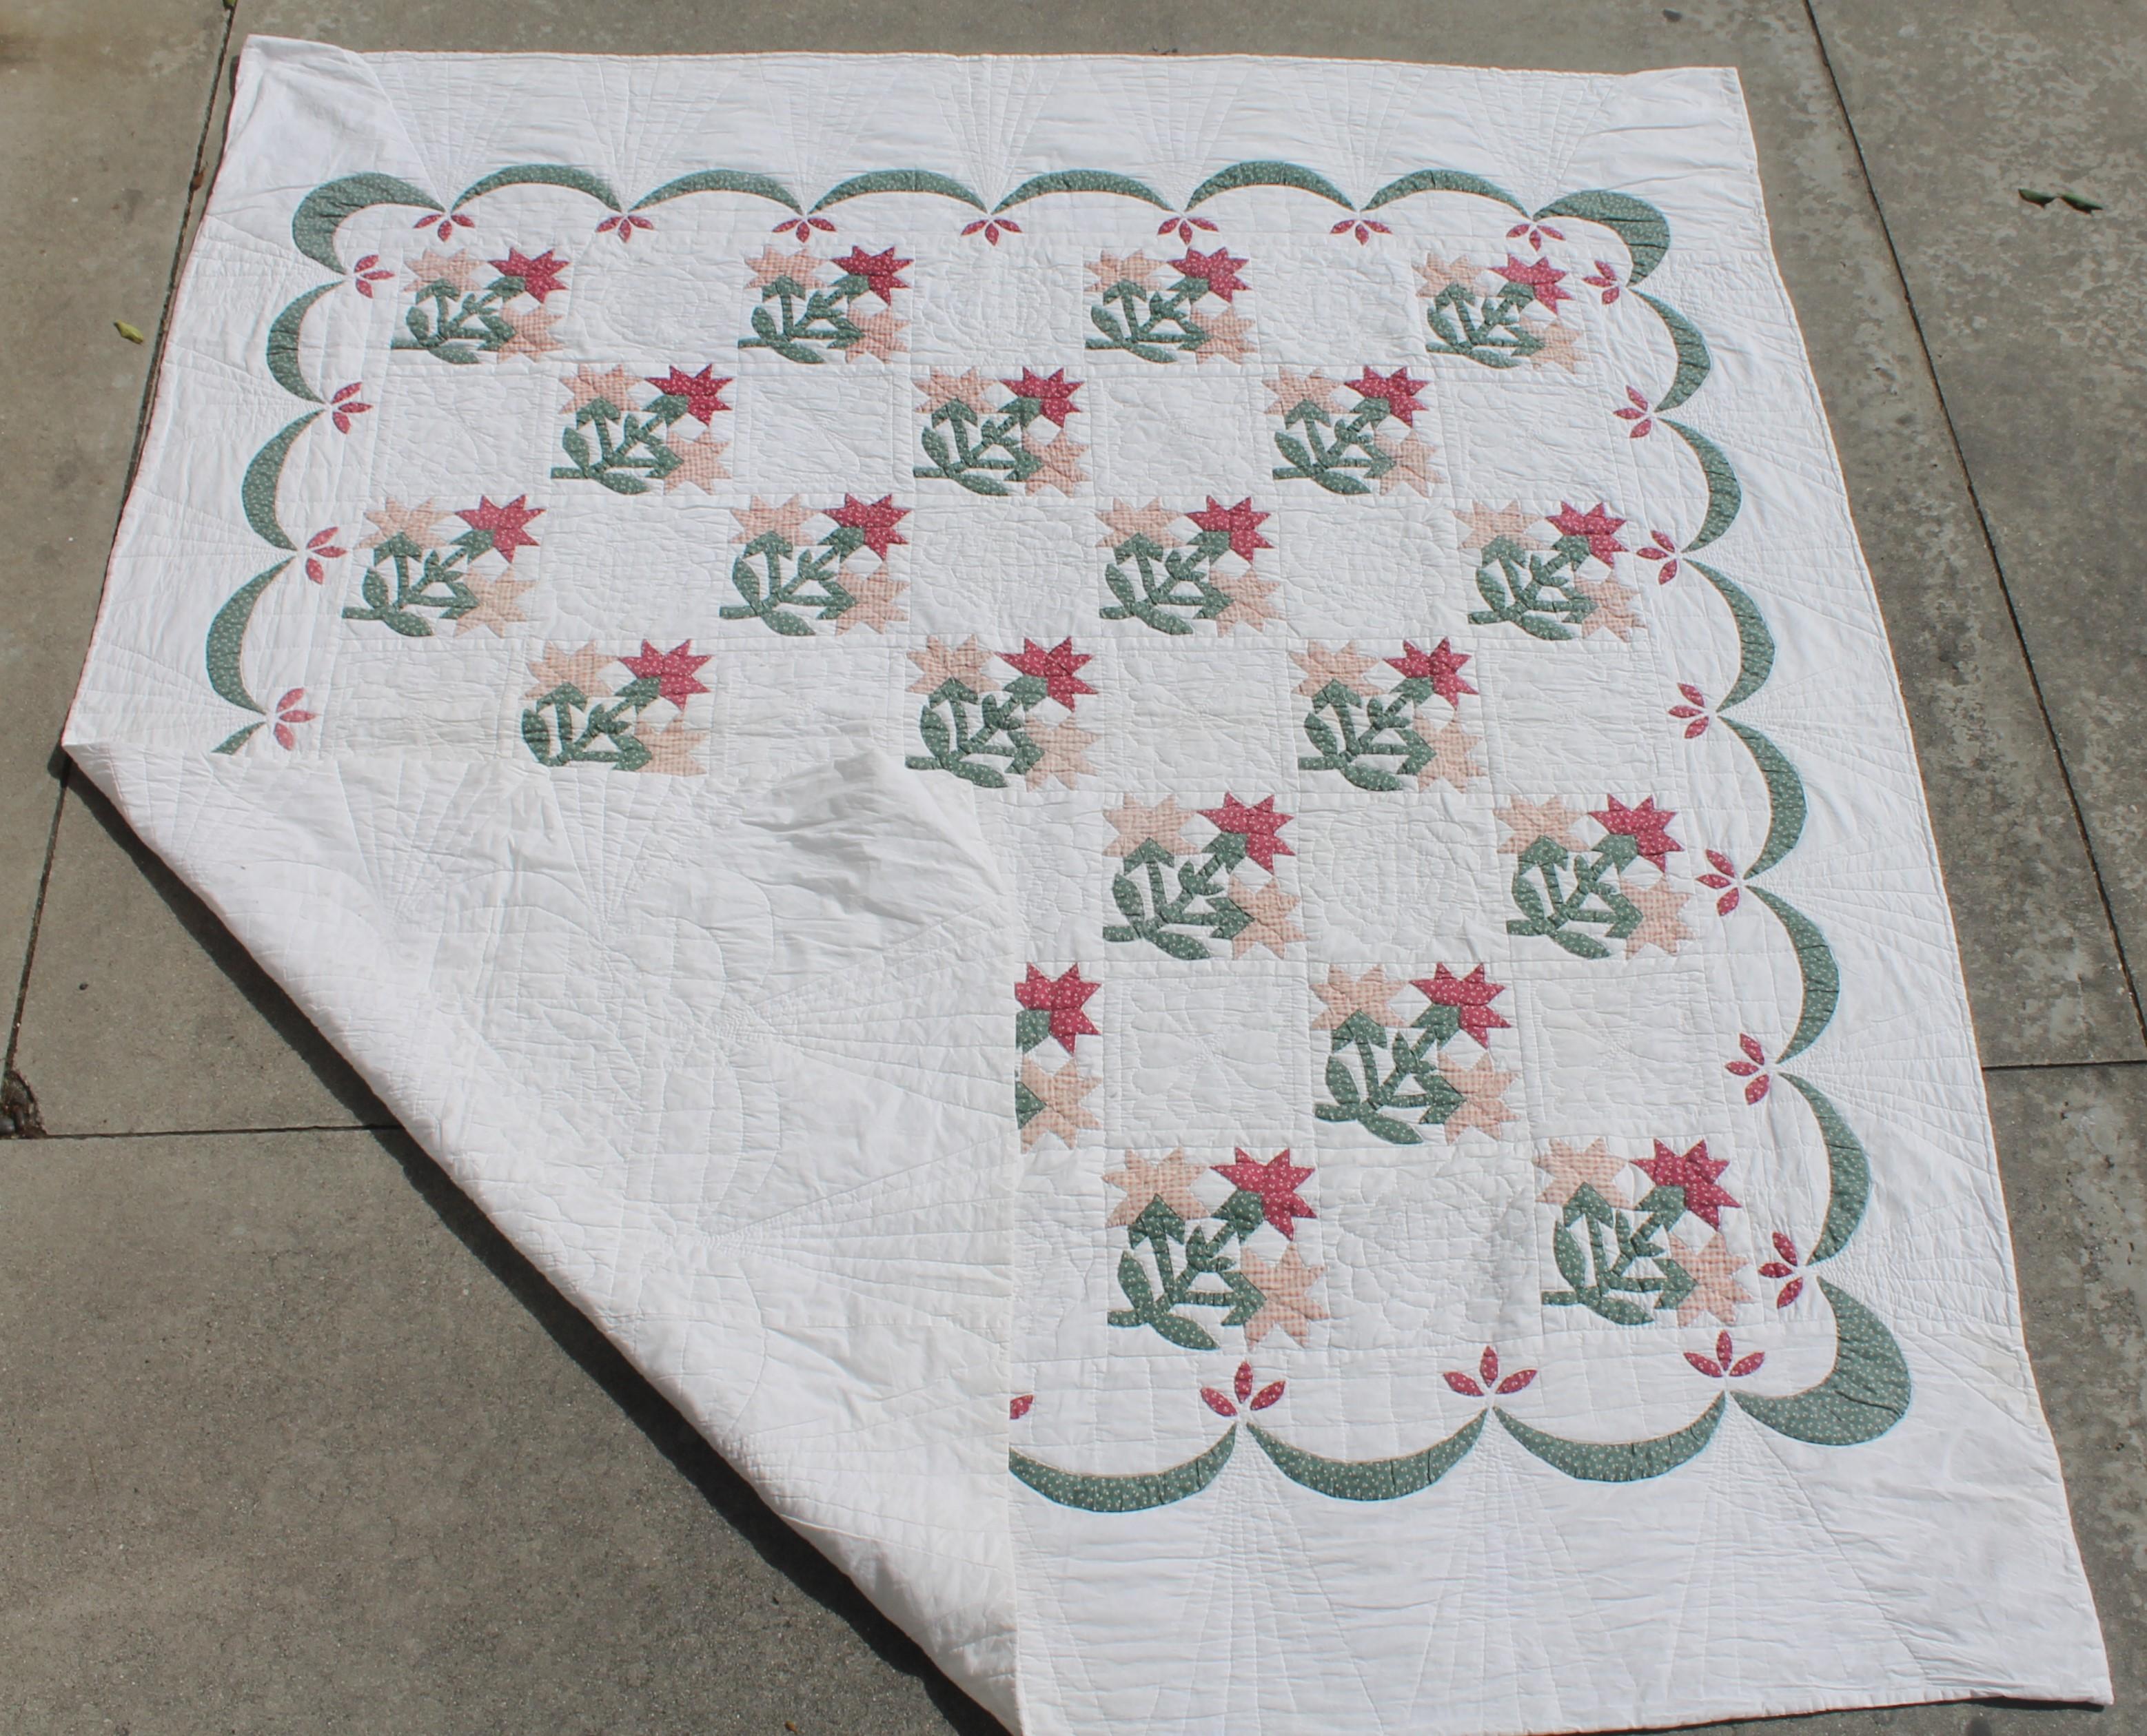 This fine late but great Carolina Lilly applique quilt is in fine condition with a wonderful swag border. The quilting and piecework is very good.